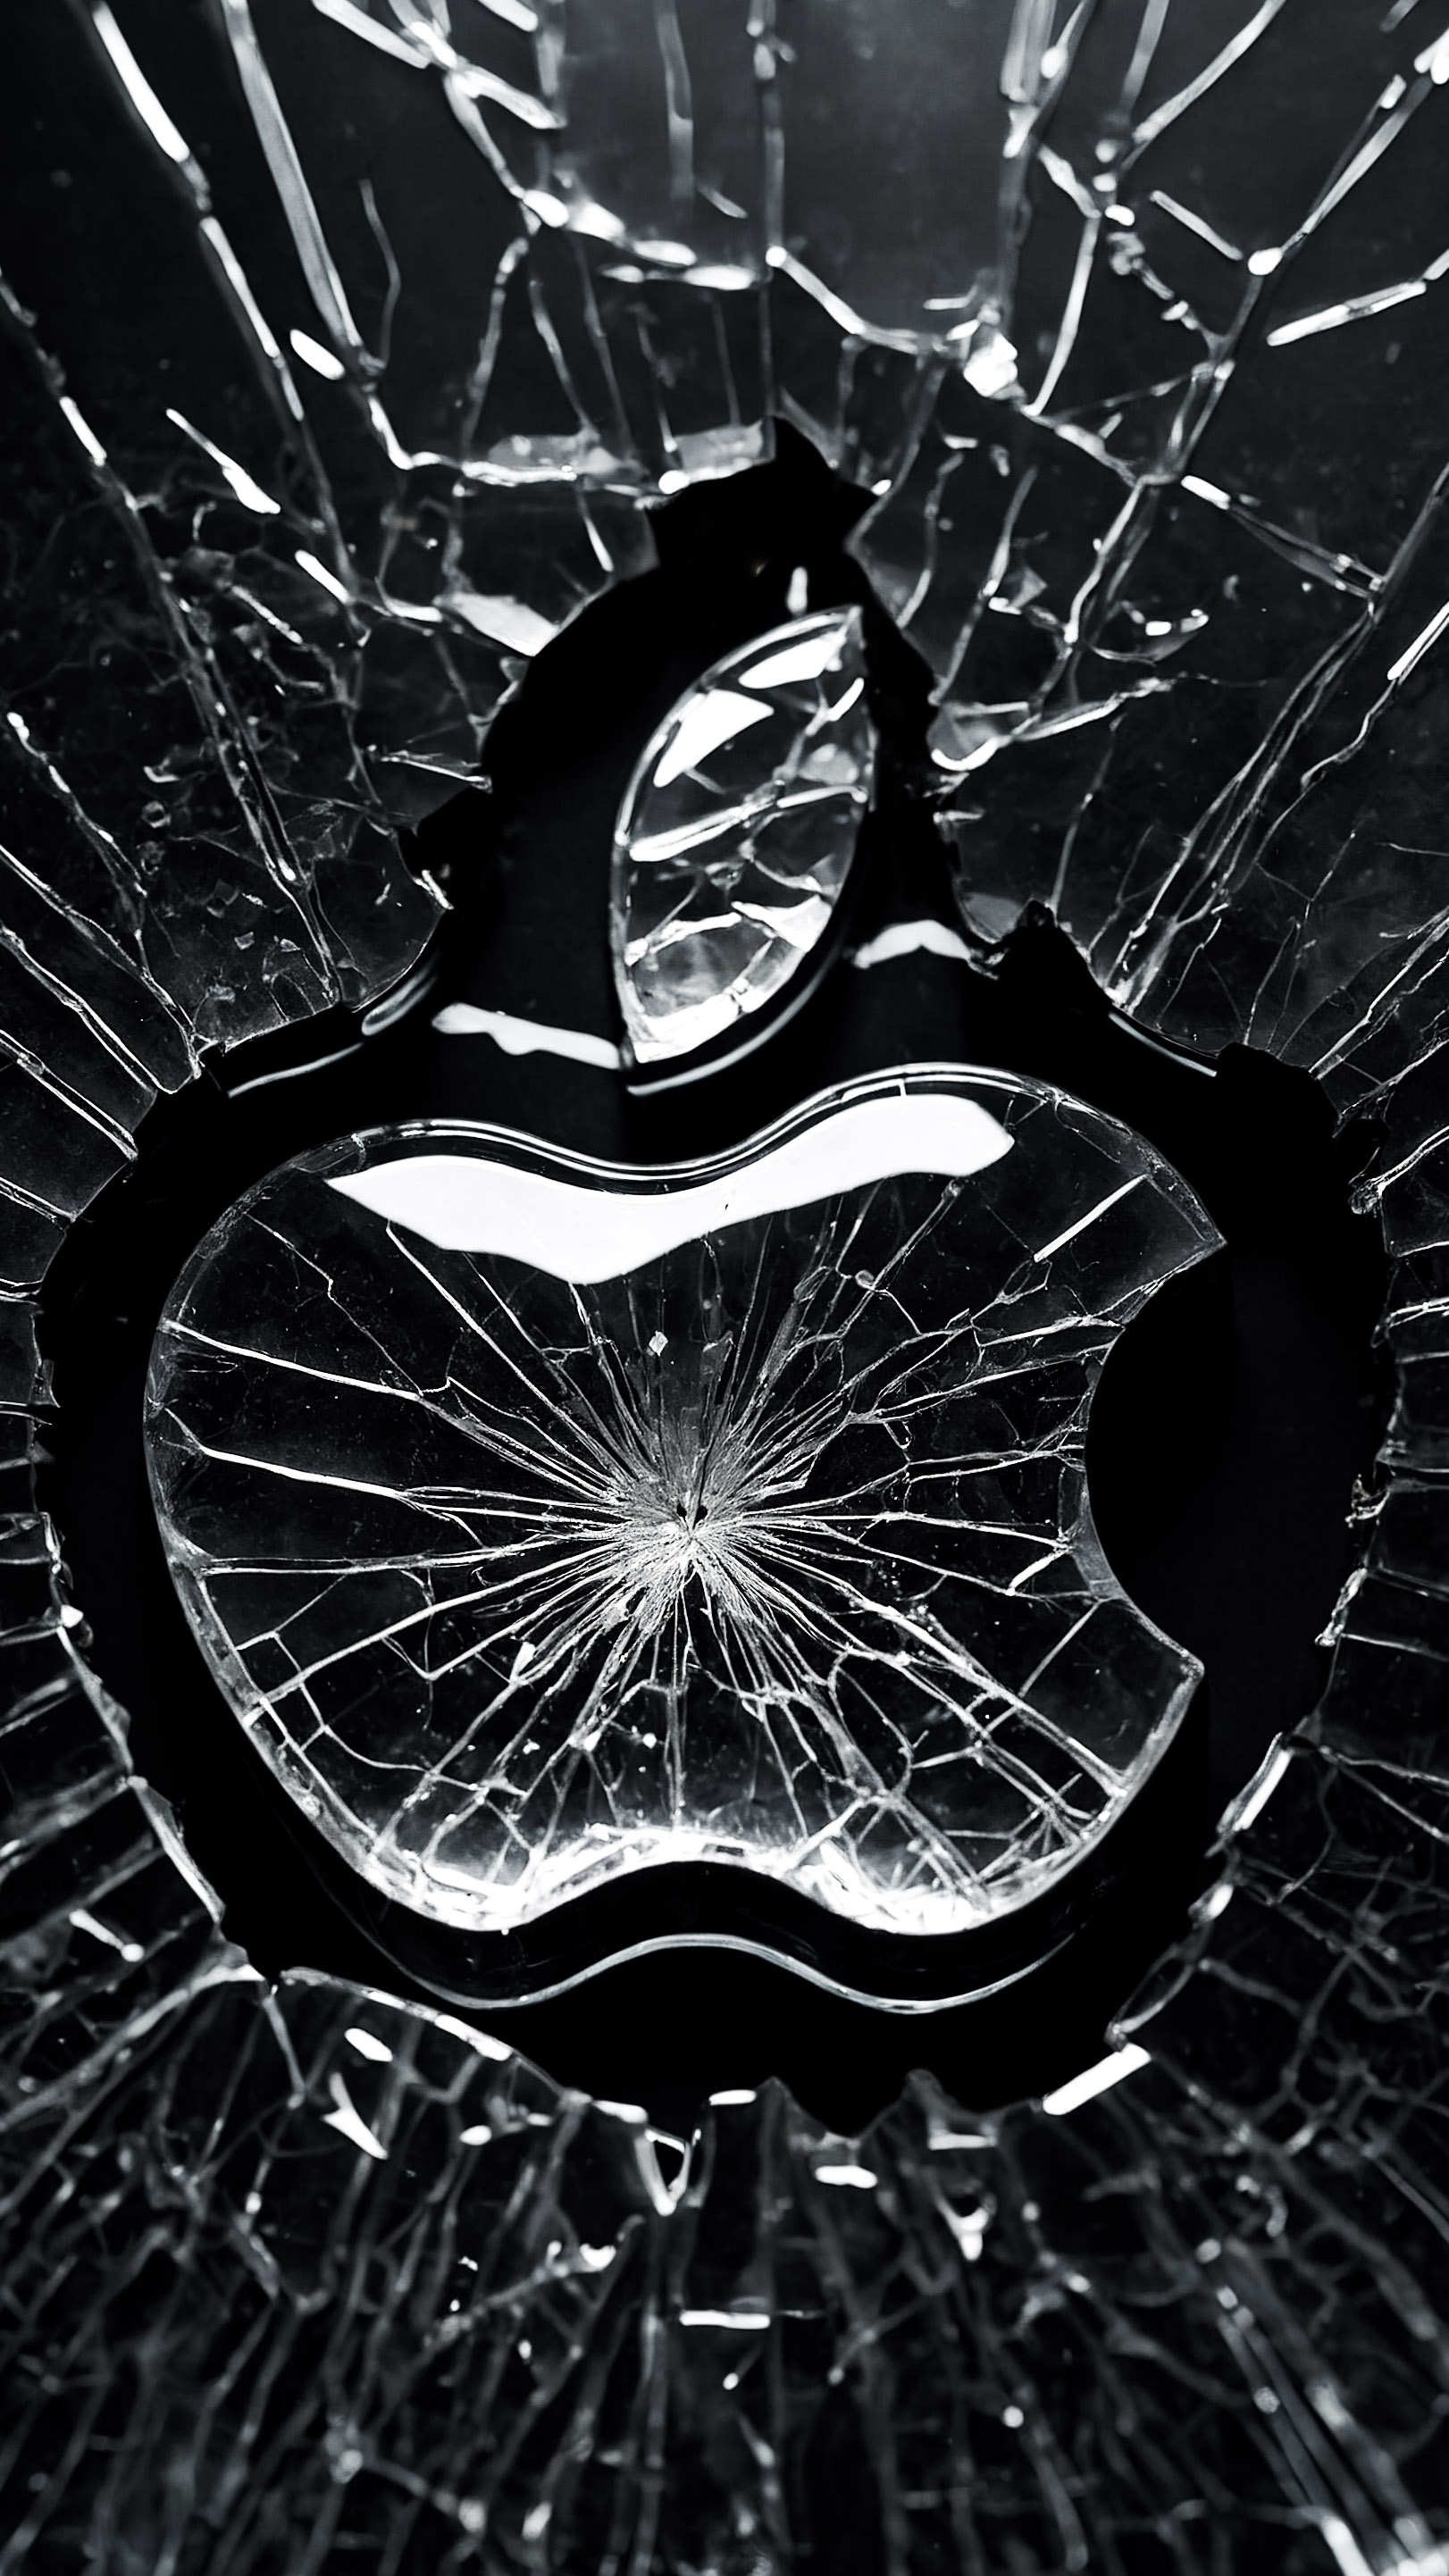 Transform your device’s appearance with an Apple logo set against a black background, featuring a shattered glass surface, with cracks radiating outward from a central point in form of the iconic Apple logo.